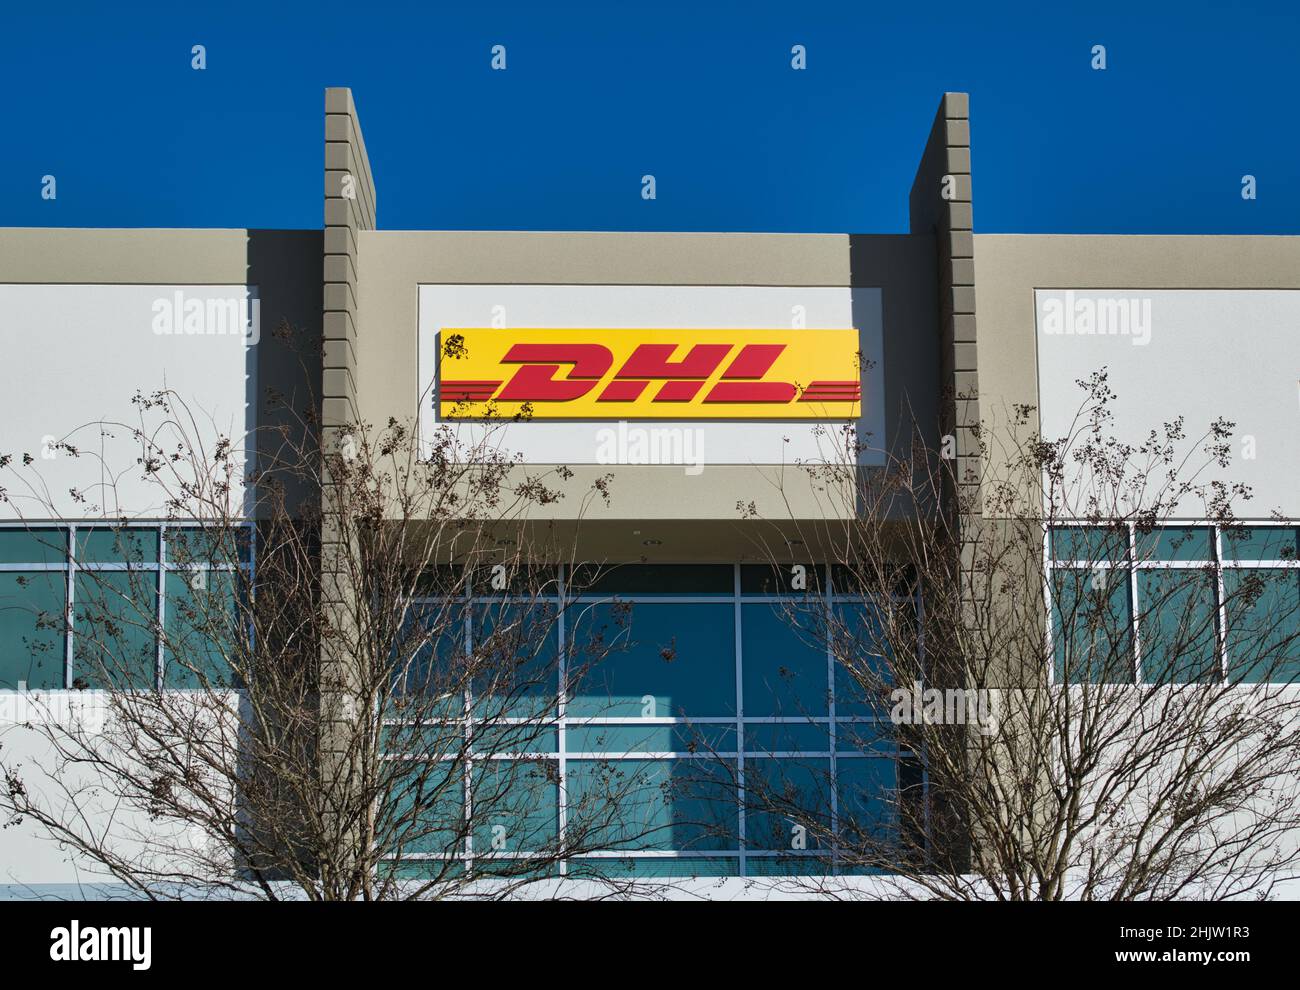 Houston, Texas USA 01-30-2022: DHL business facade with sign logo and ...